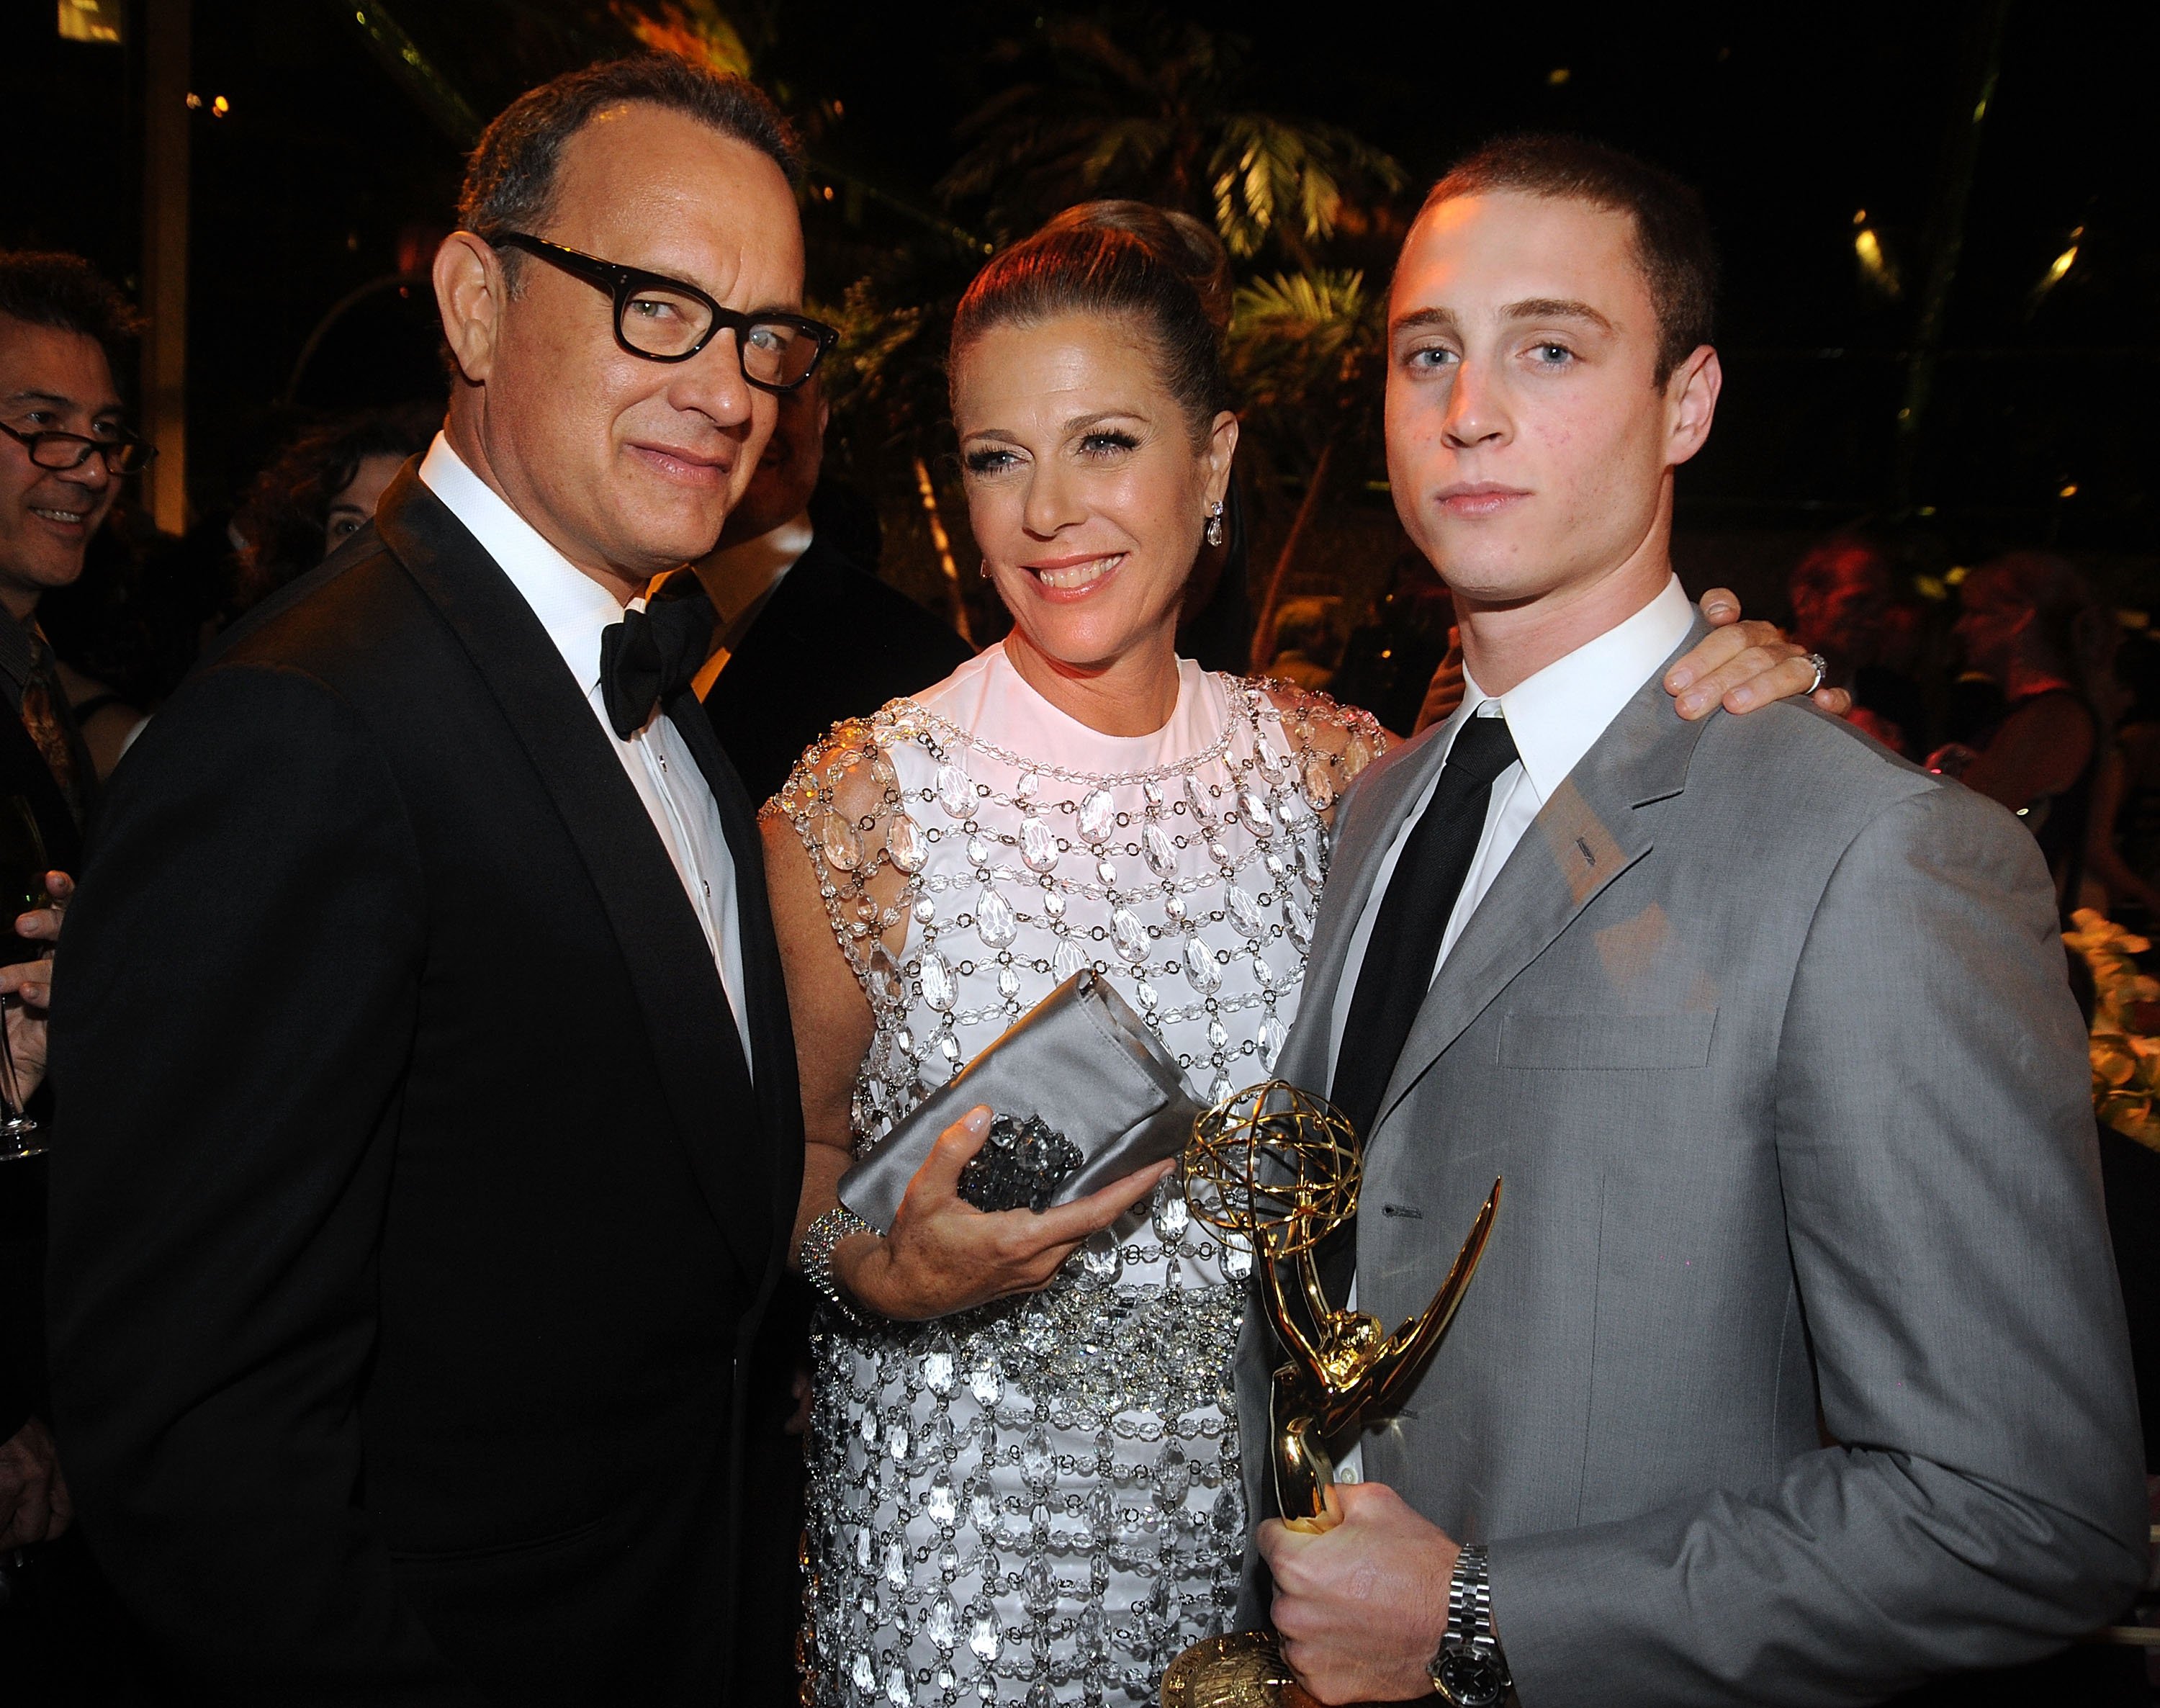 Actor Tom Hanks, actress Rita Wilson and actor Chet Hanks attend HBO's Annual Emmy Awards after party at the Pacific Design Center on August 29, 2010. | Source: Getty Images